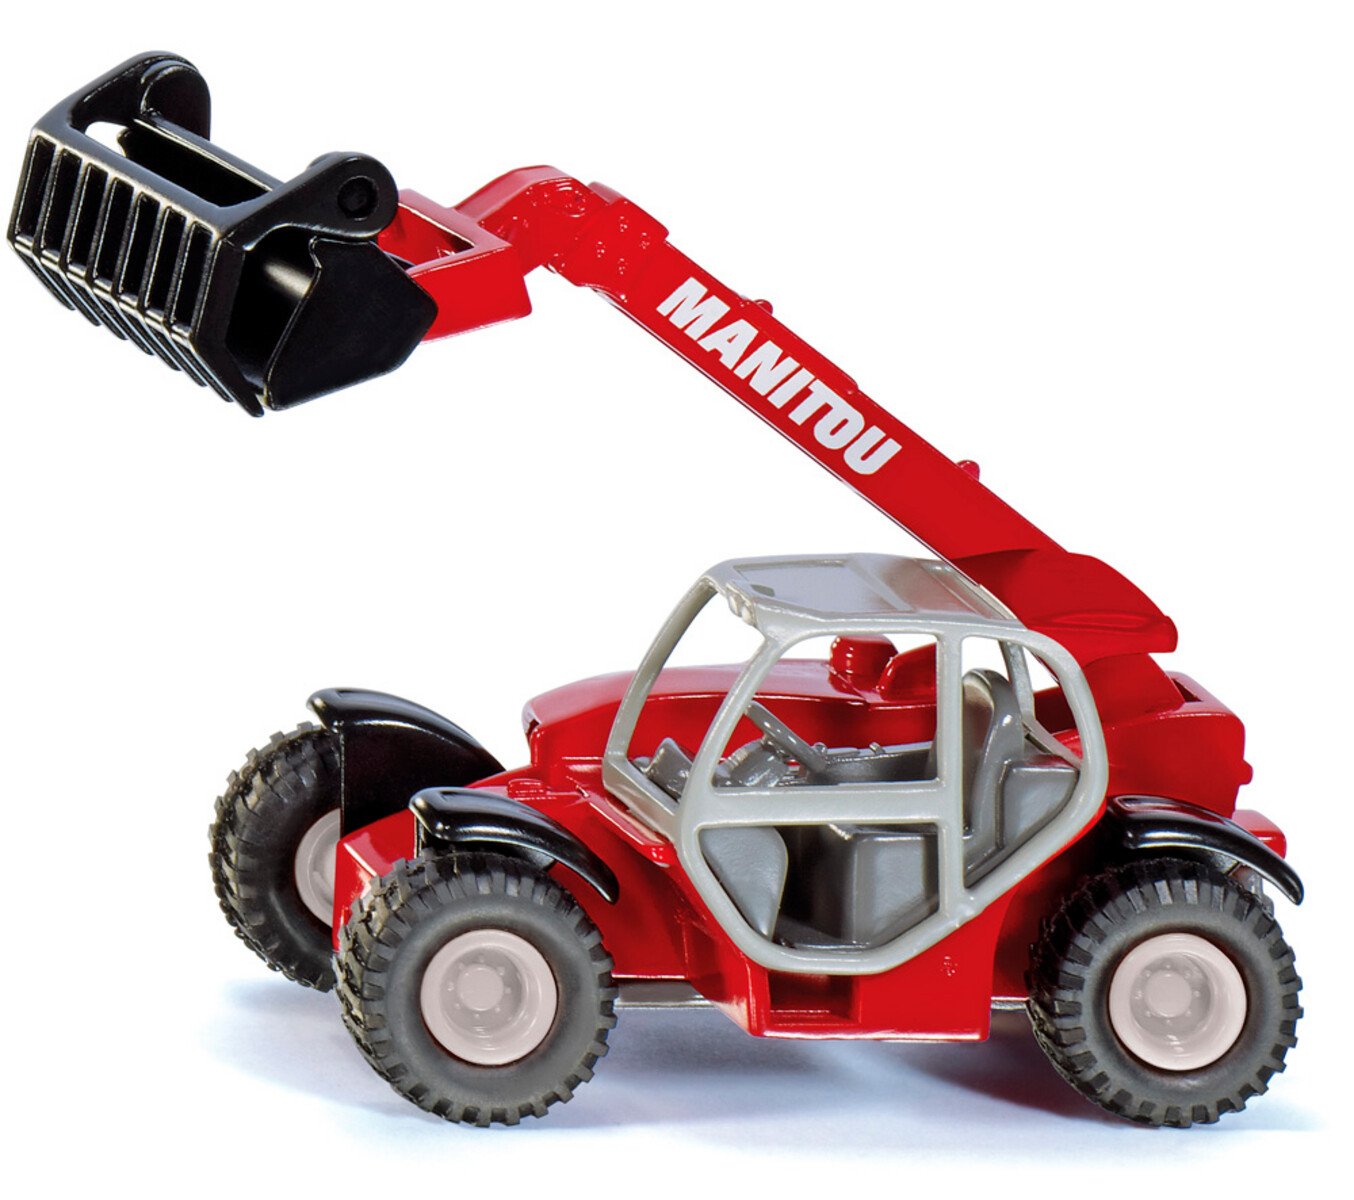 Manitou-telescooplader